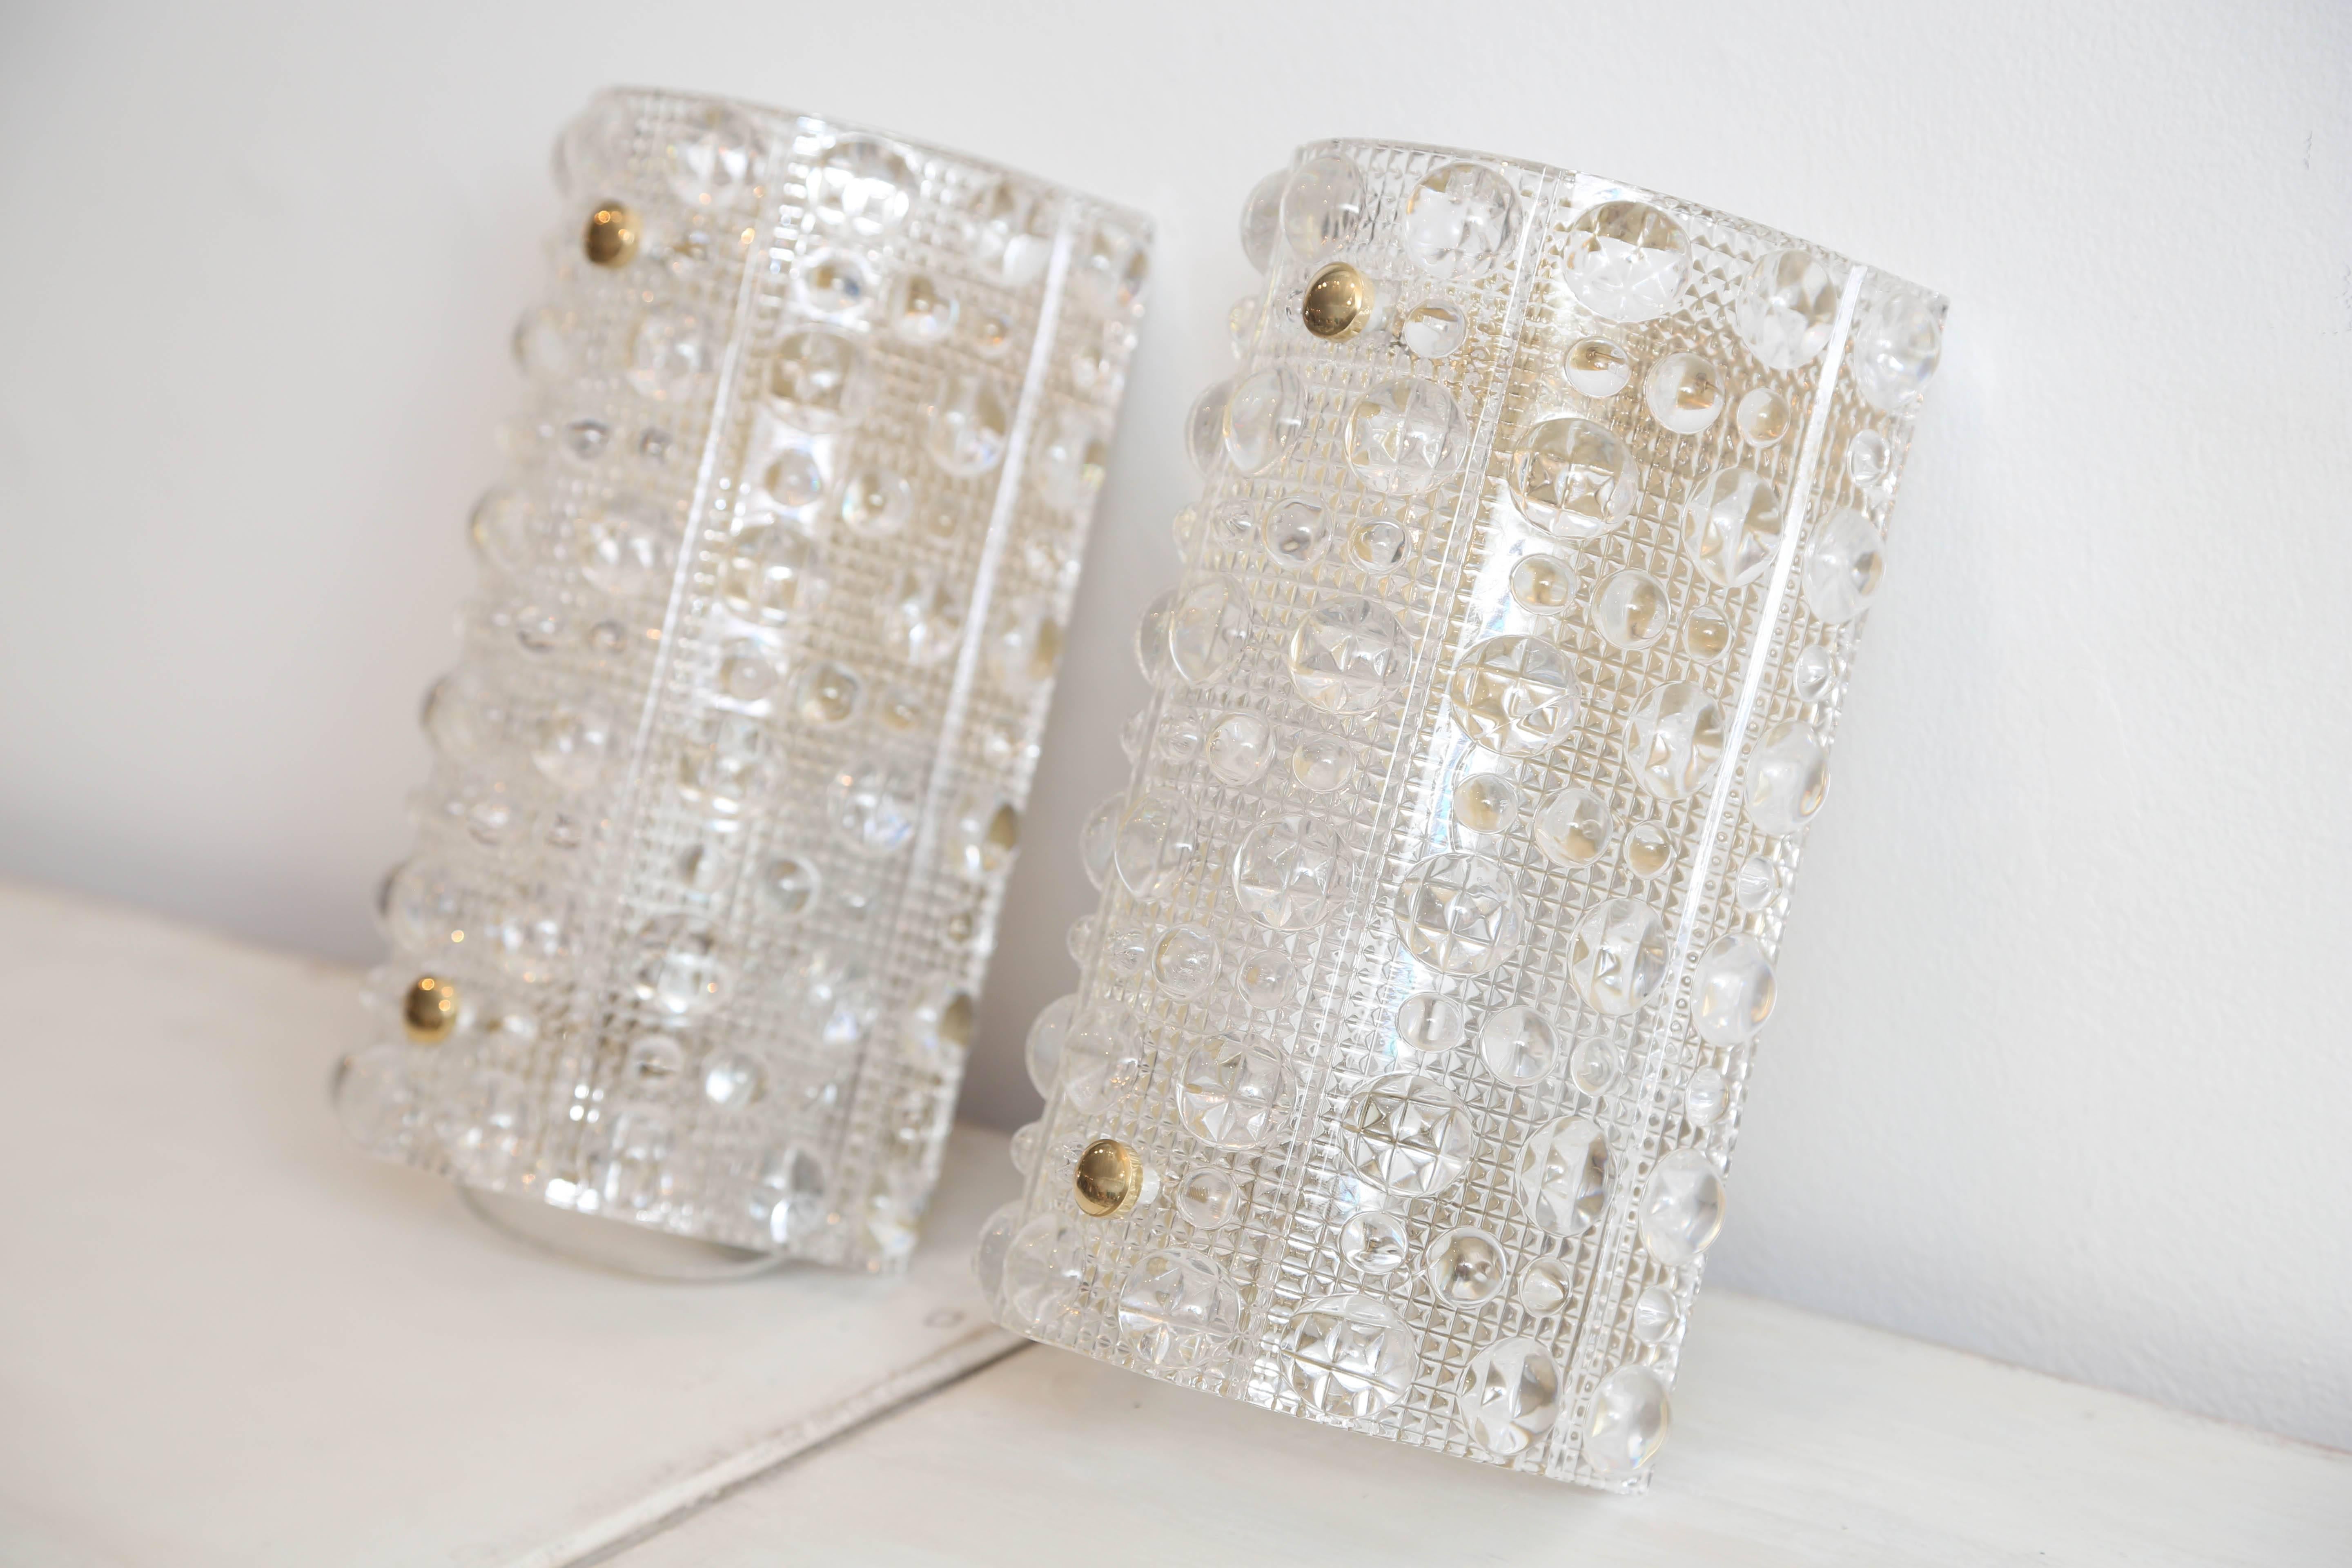 Brass and crystal Orrefors wall sconces designed by Carl Fagerlund.
Modern raised bubble pattern.
One socket each. 40 watt max candelabra base bulb
Sconces have been cleaned,polished and rewired to US standards.
circa 1960s

Measures: H 10